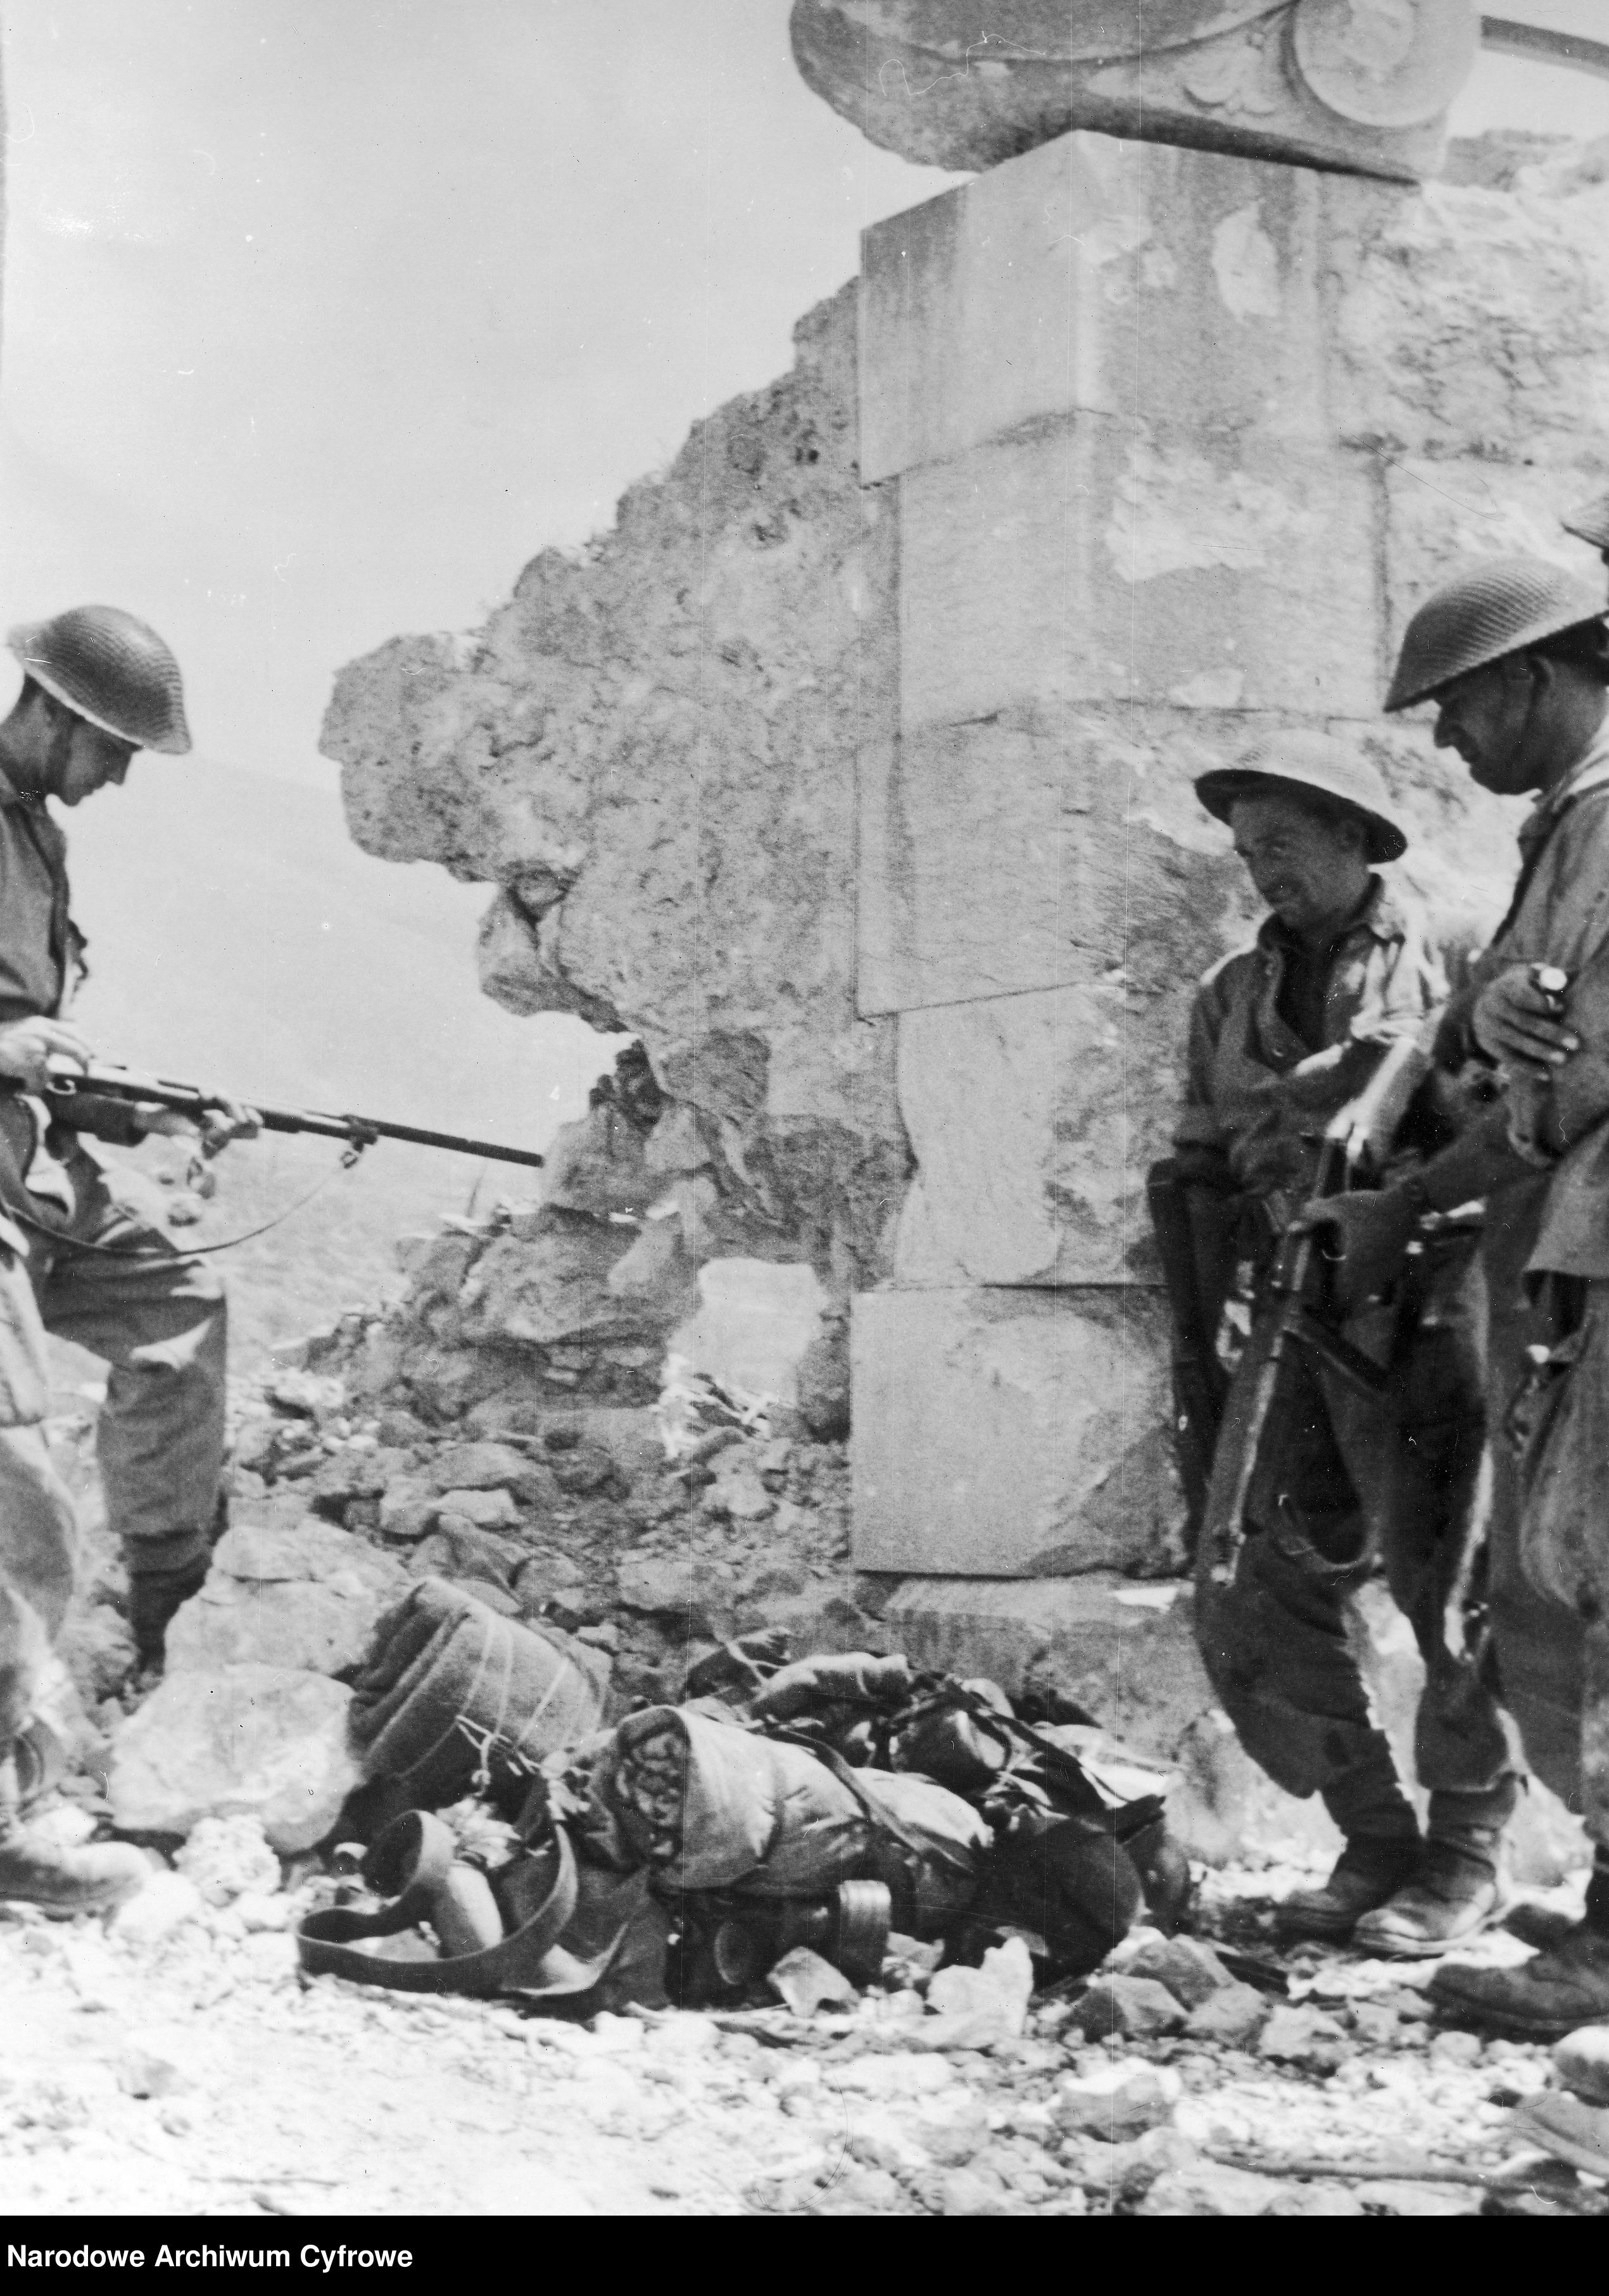 <p class='eng'>1944/05/25<br />Poles with equipment removed from a German bunker. The soldier on the right is armed with a Thompson M1 submachine gun, the soldier on the left holds a Winchester shotgun.<br />NAC 3/24/0/-/457/12</p>